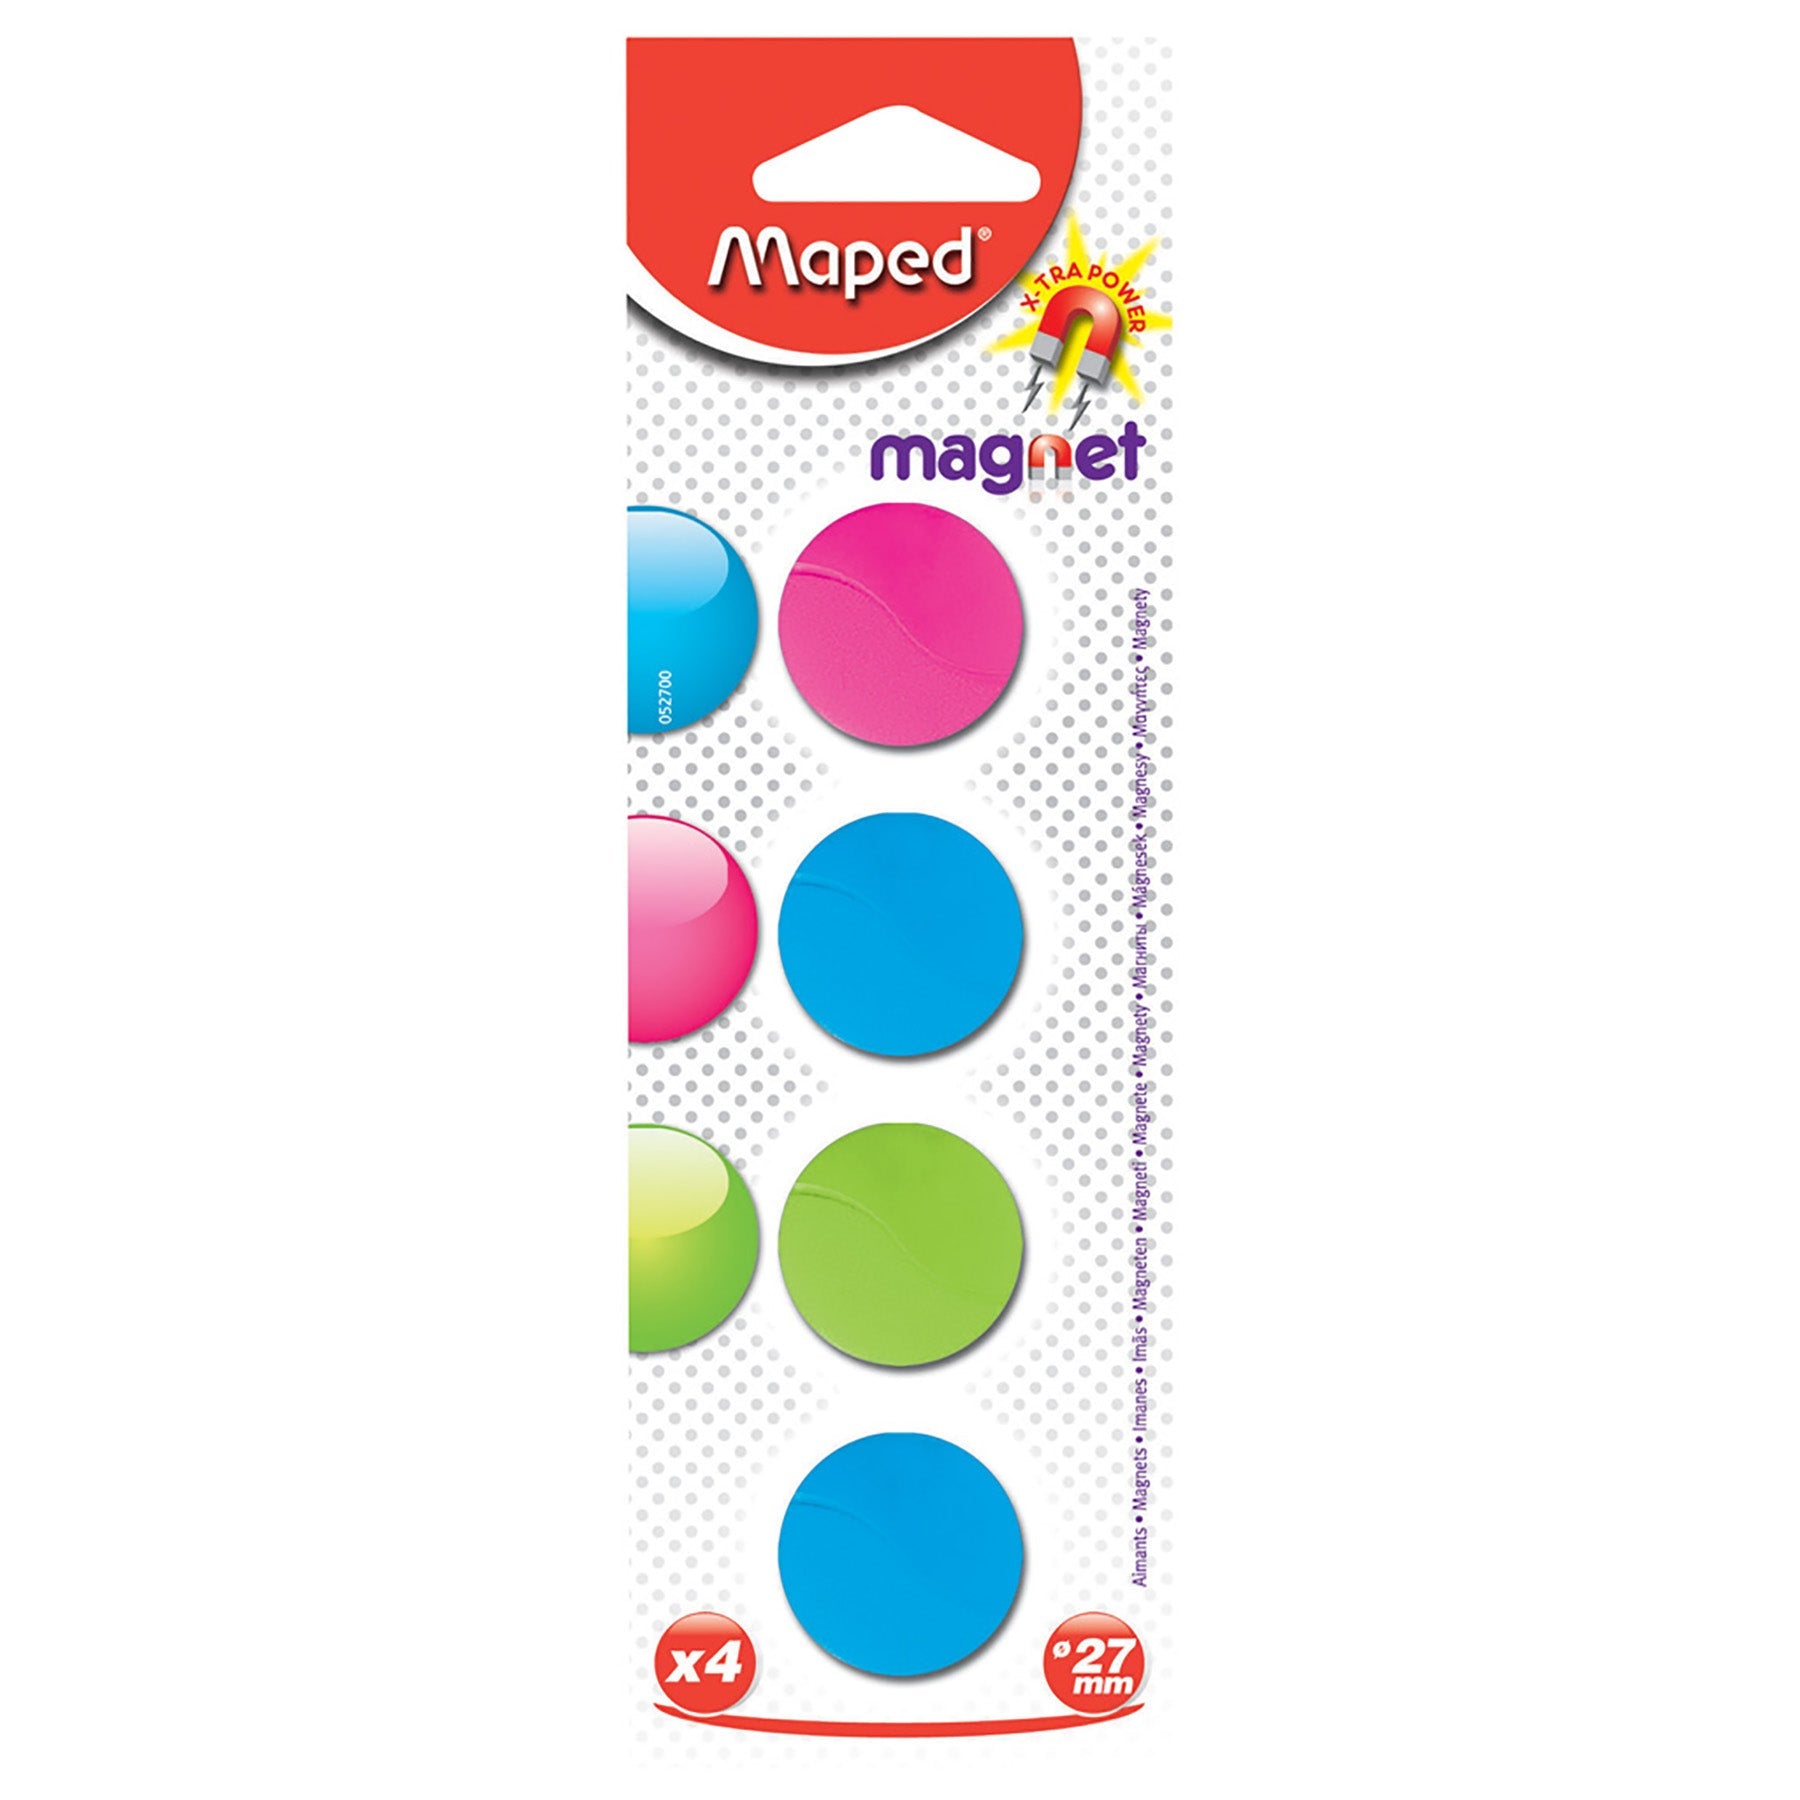 Maped 4 Magnets Round Plastic 1in